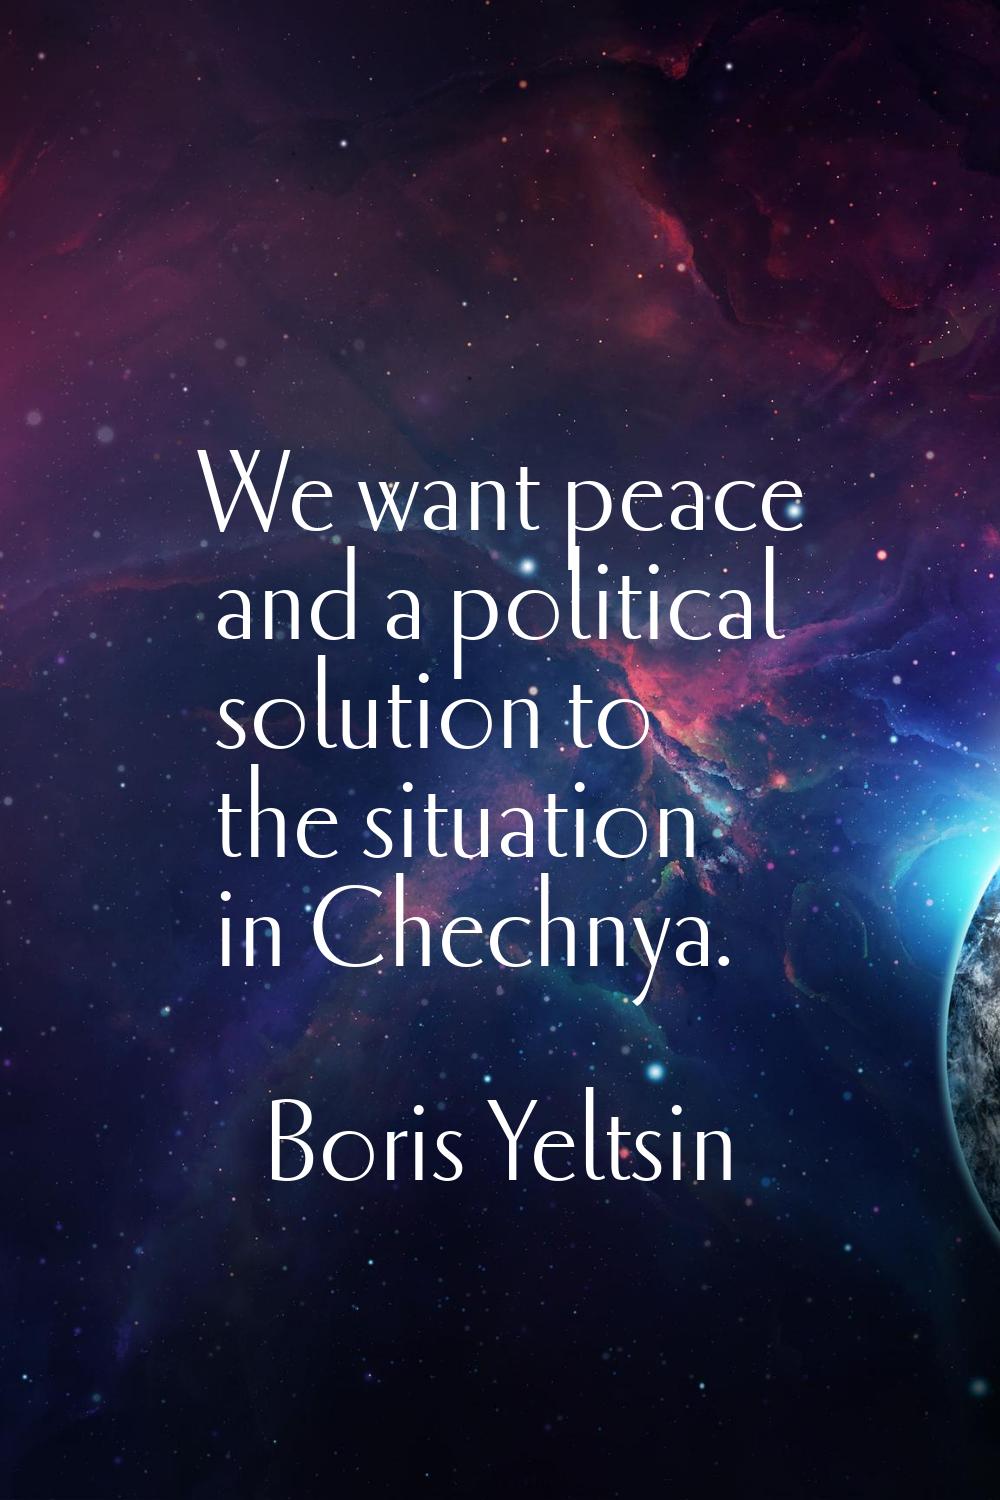 We want peace and a political solution to the situation in Chechnya.